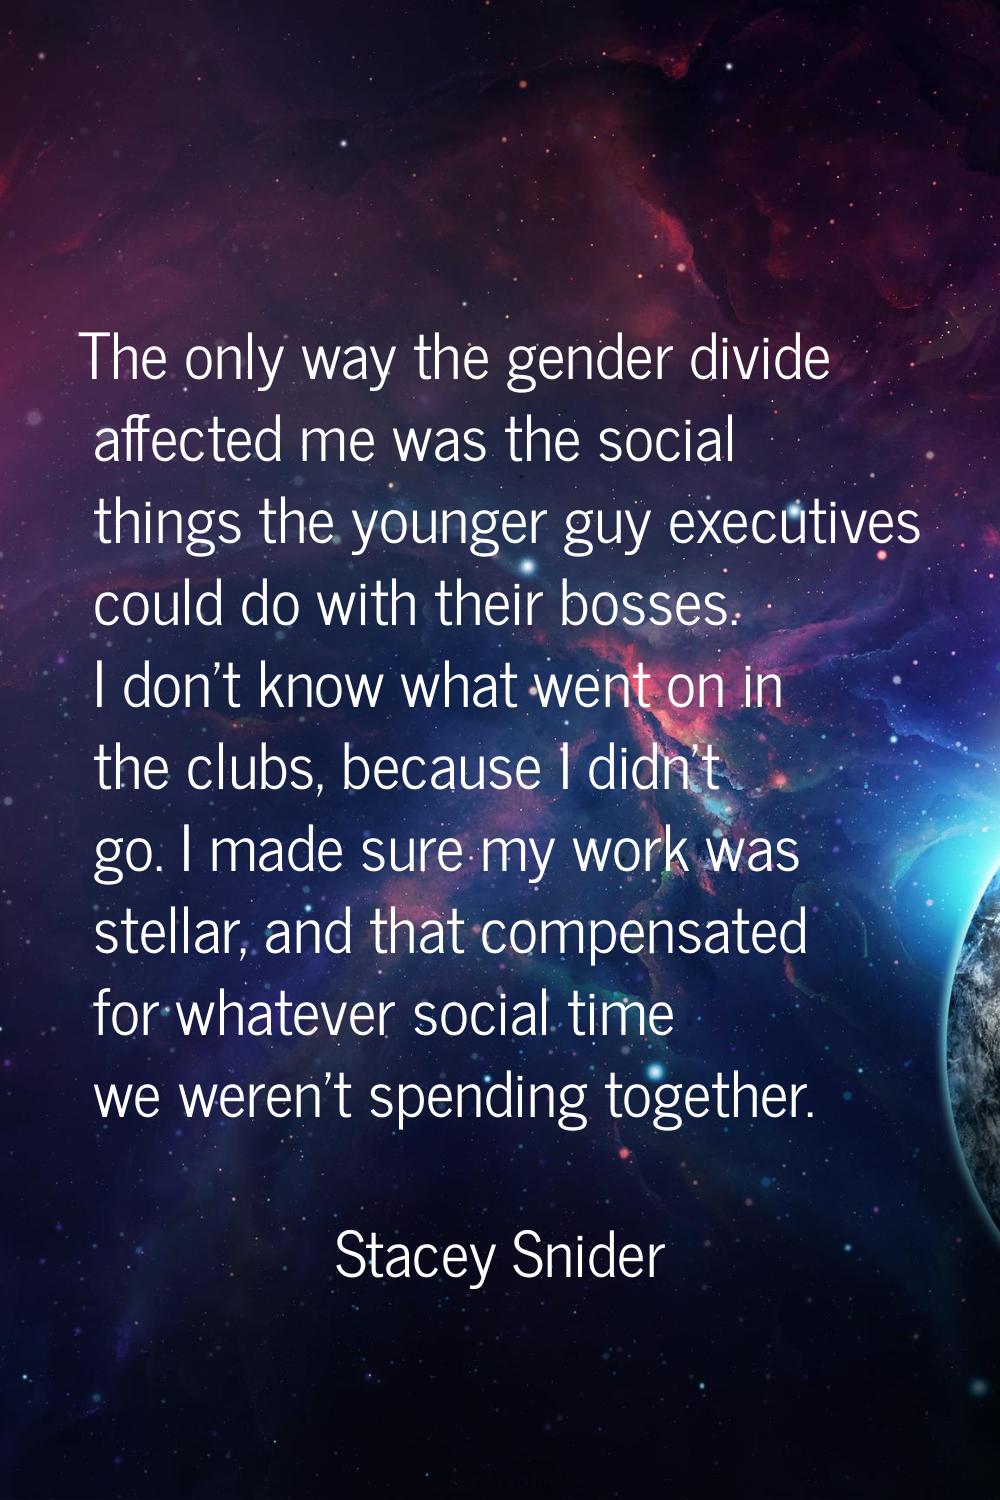 The only way the gender divide affected me was the social things the younger guy executives could d